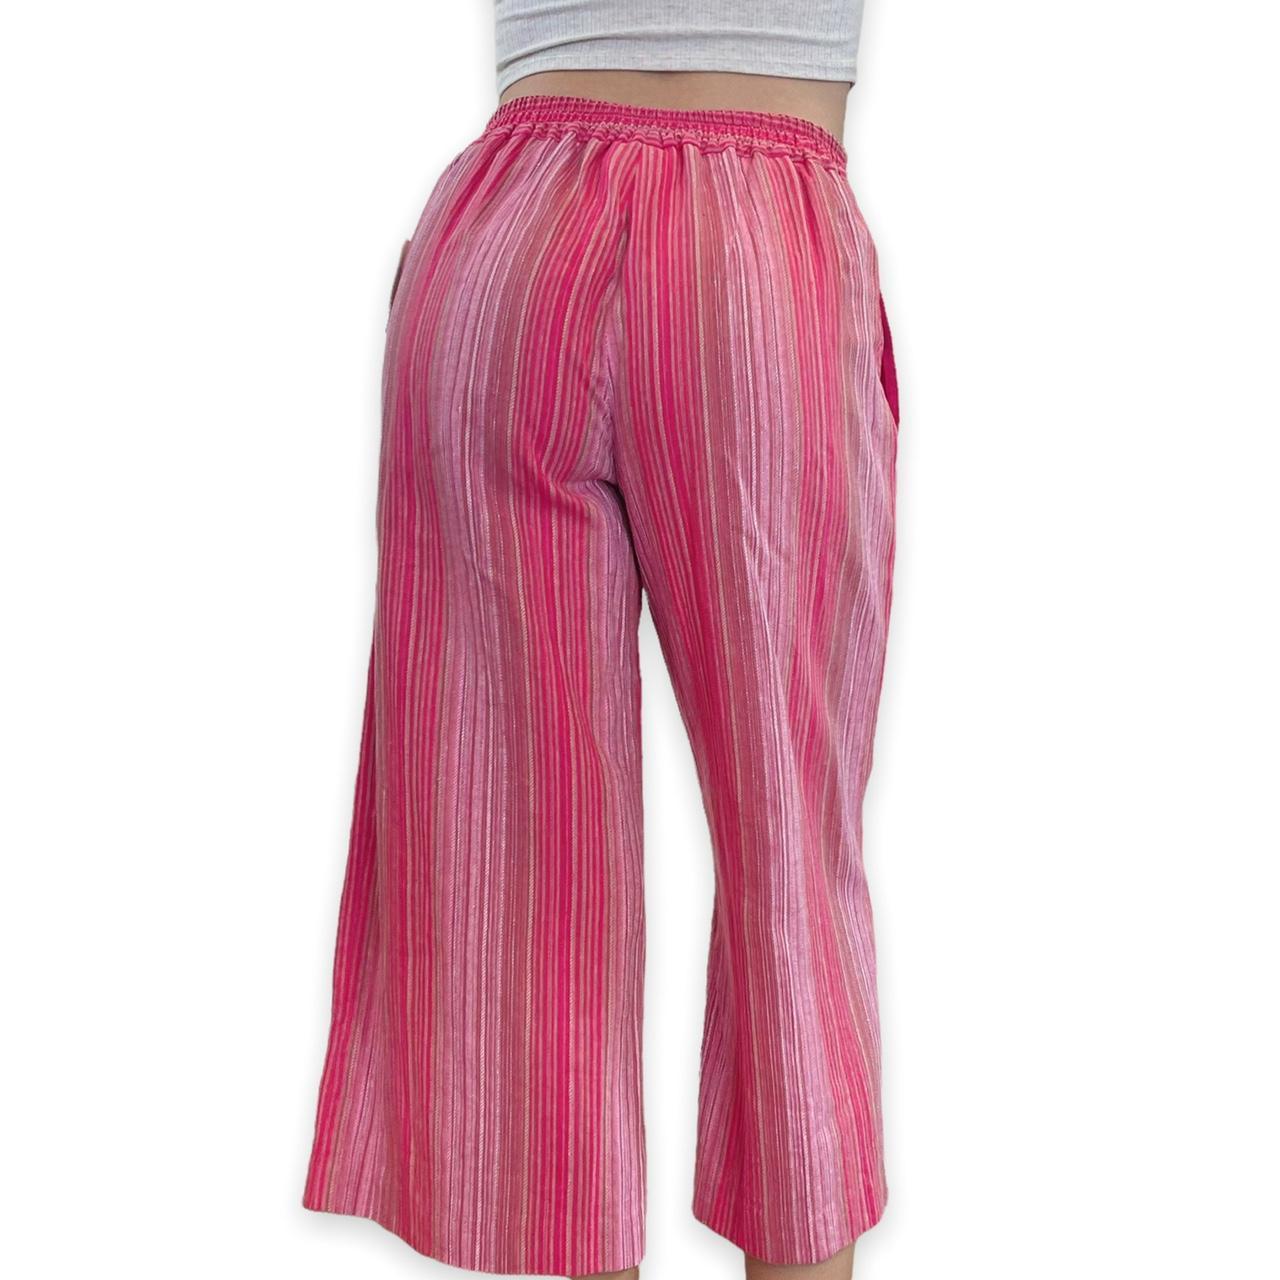 Product Image 2 - 💕NWT Coldwater Creek Pink Striped